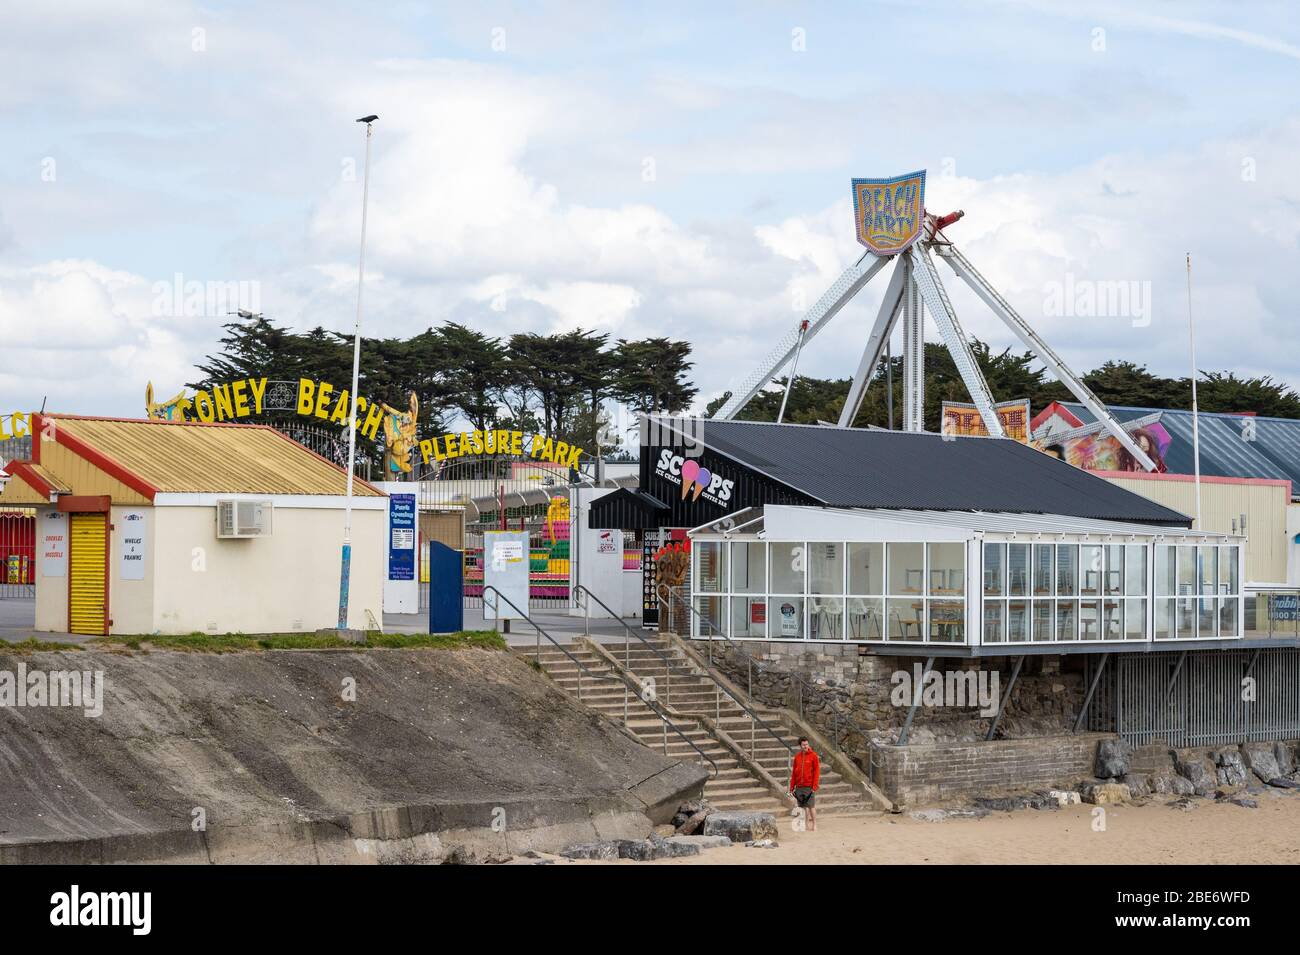 A general view of the Coney Beach Pleasure Park in Porthcawl, Wales, UK, during the coronavirus lockdown. Stock Photo